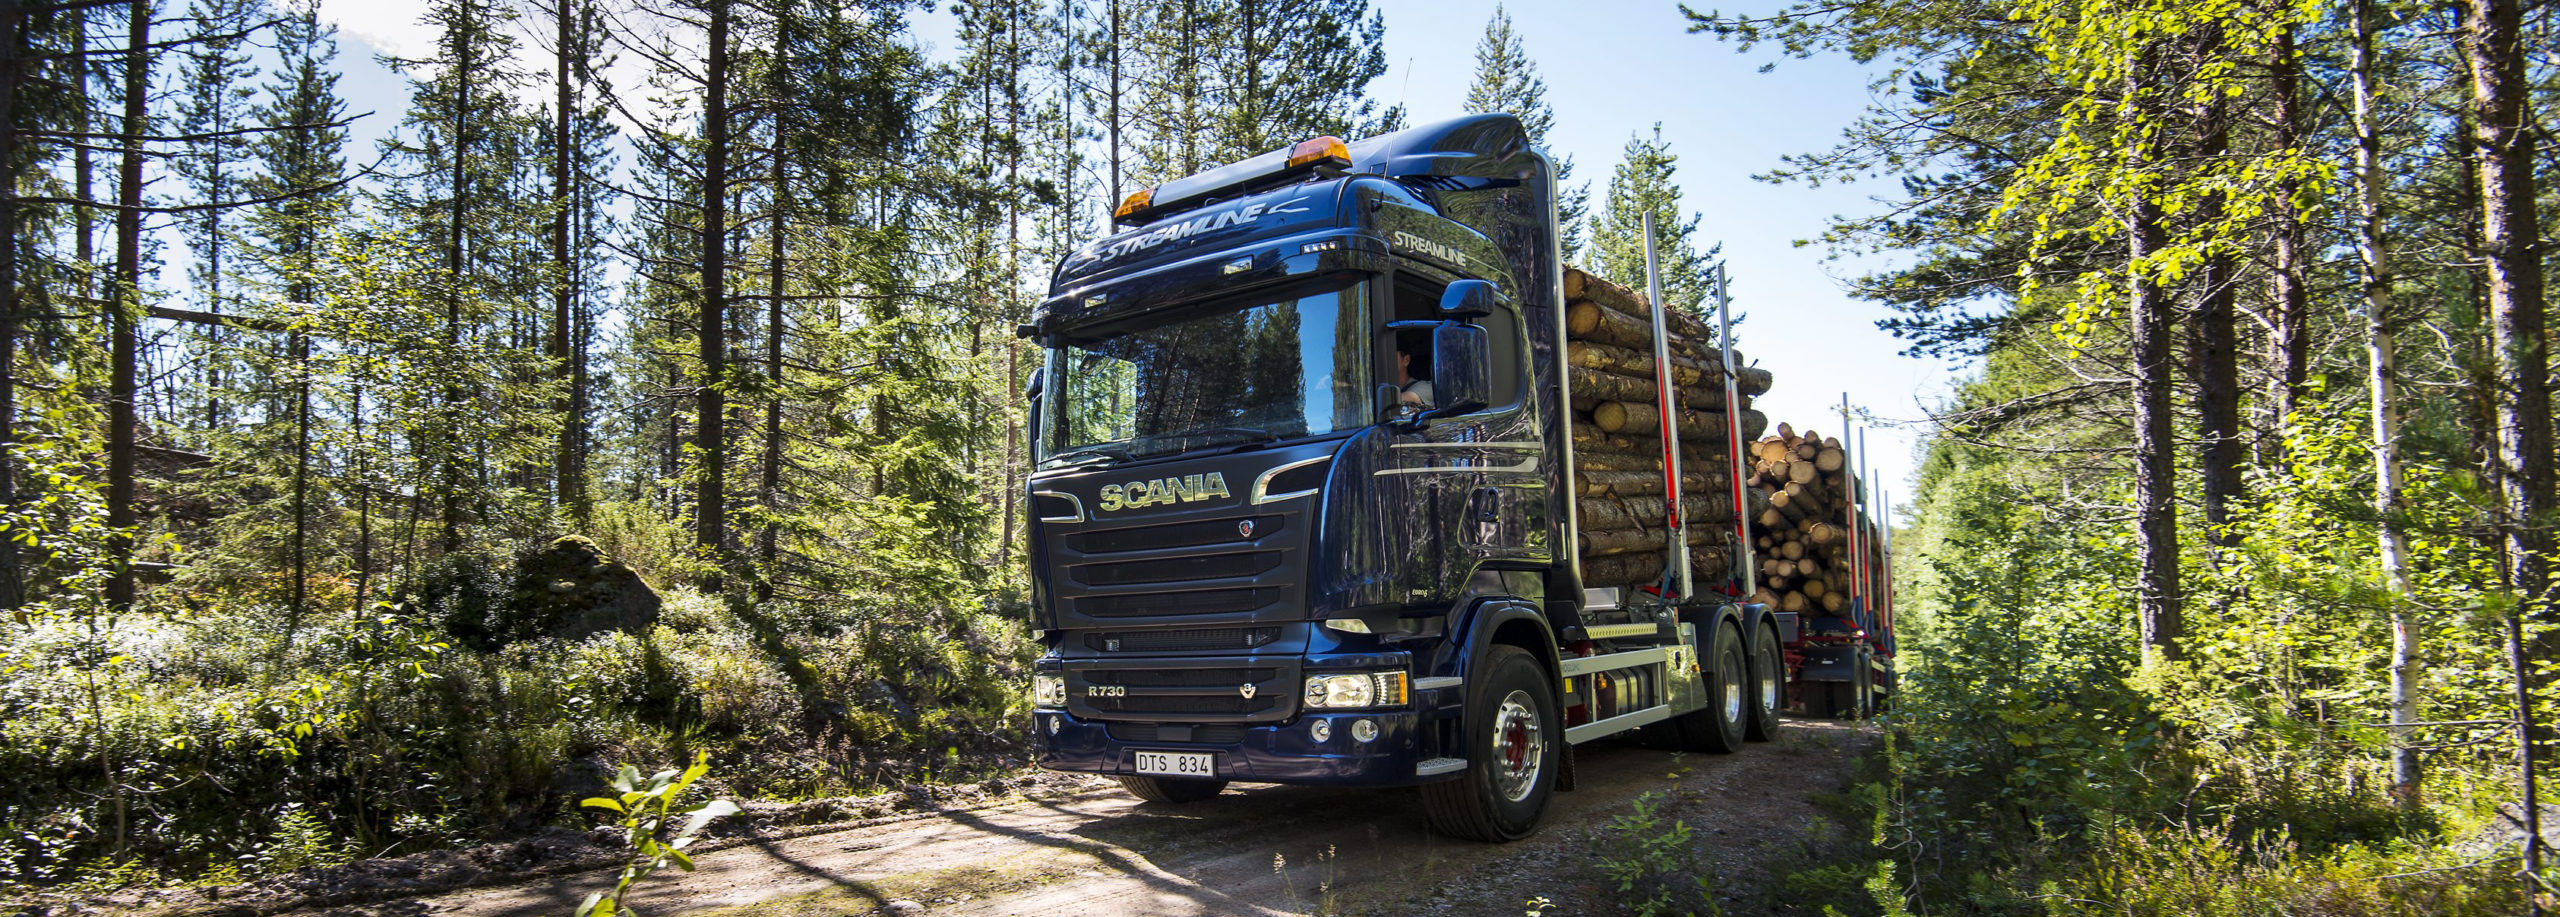 timber industry road transport image